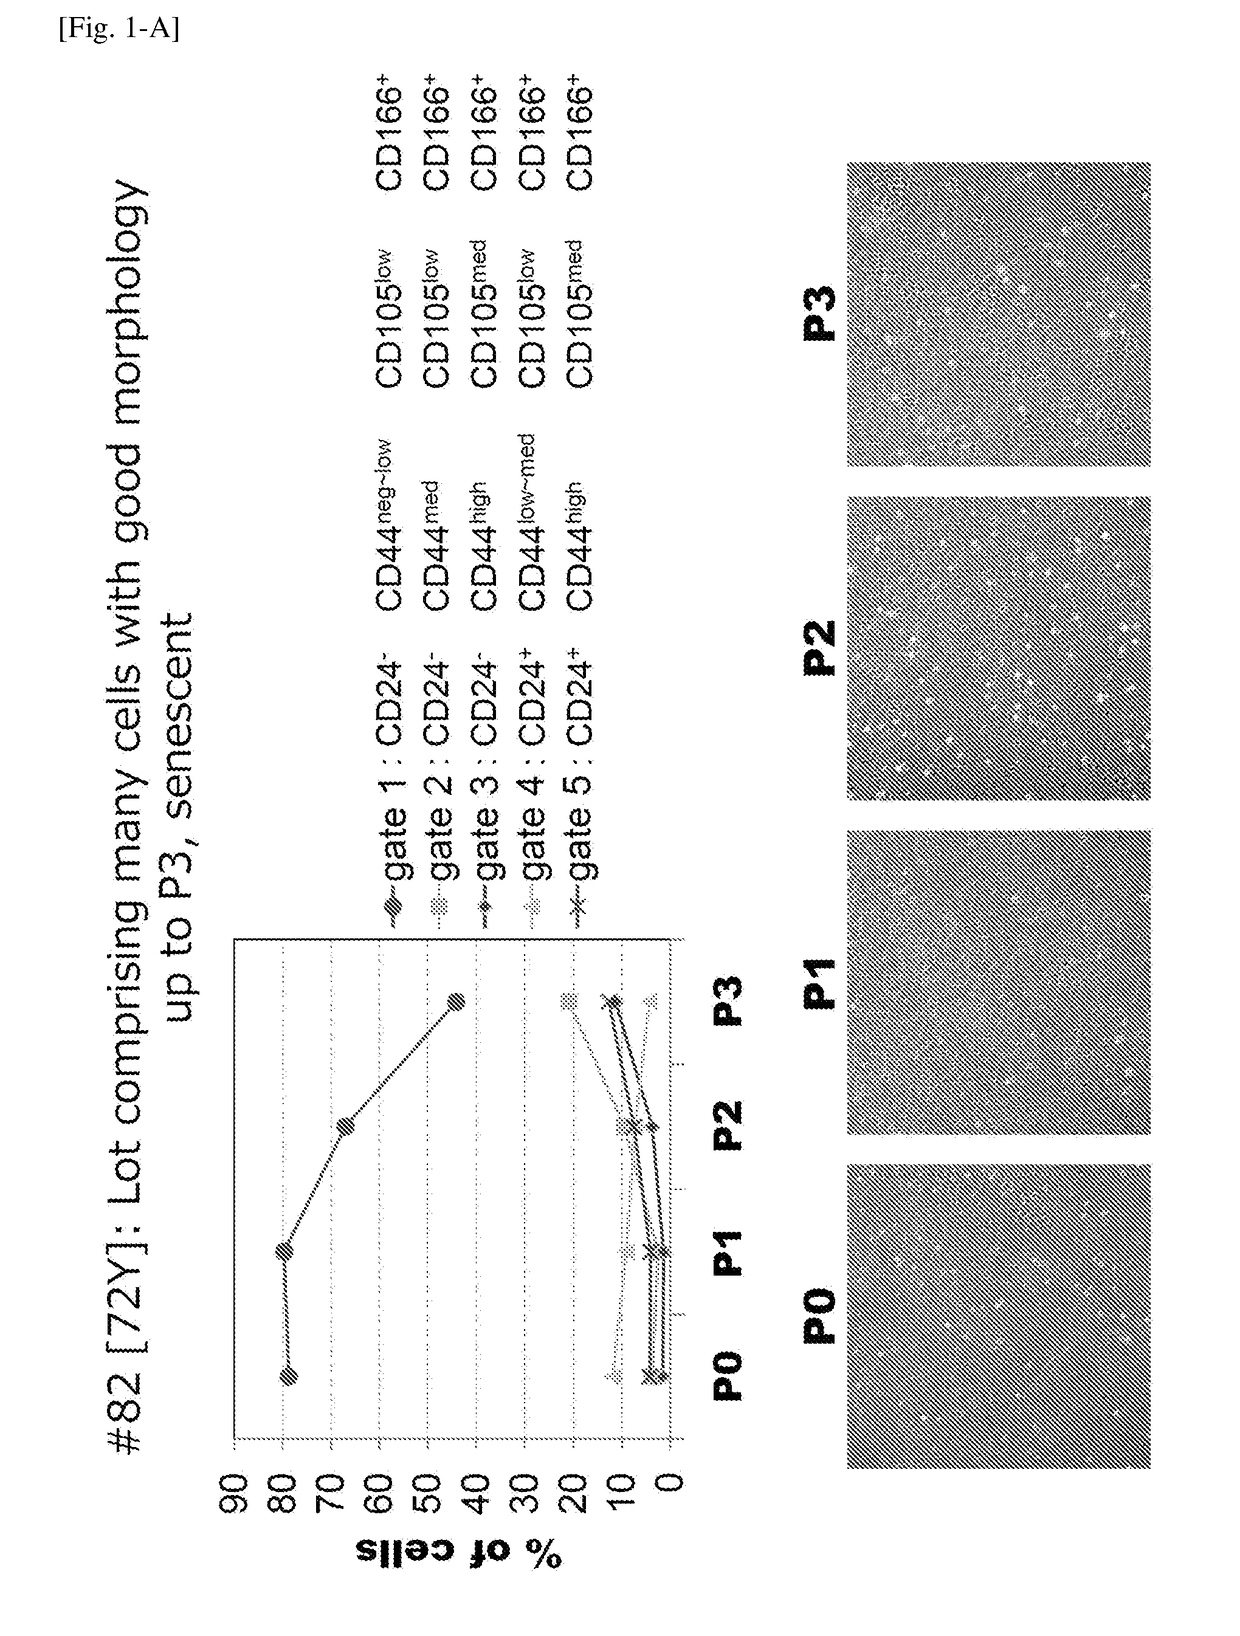 Human functional corneal endothelial cell and application thereof